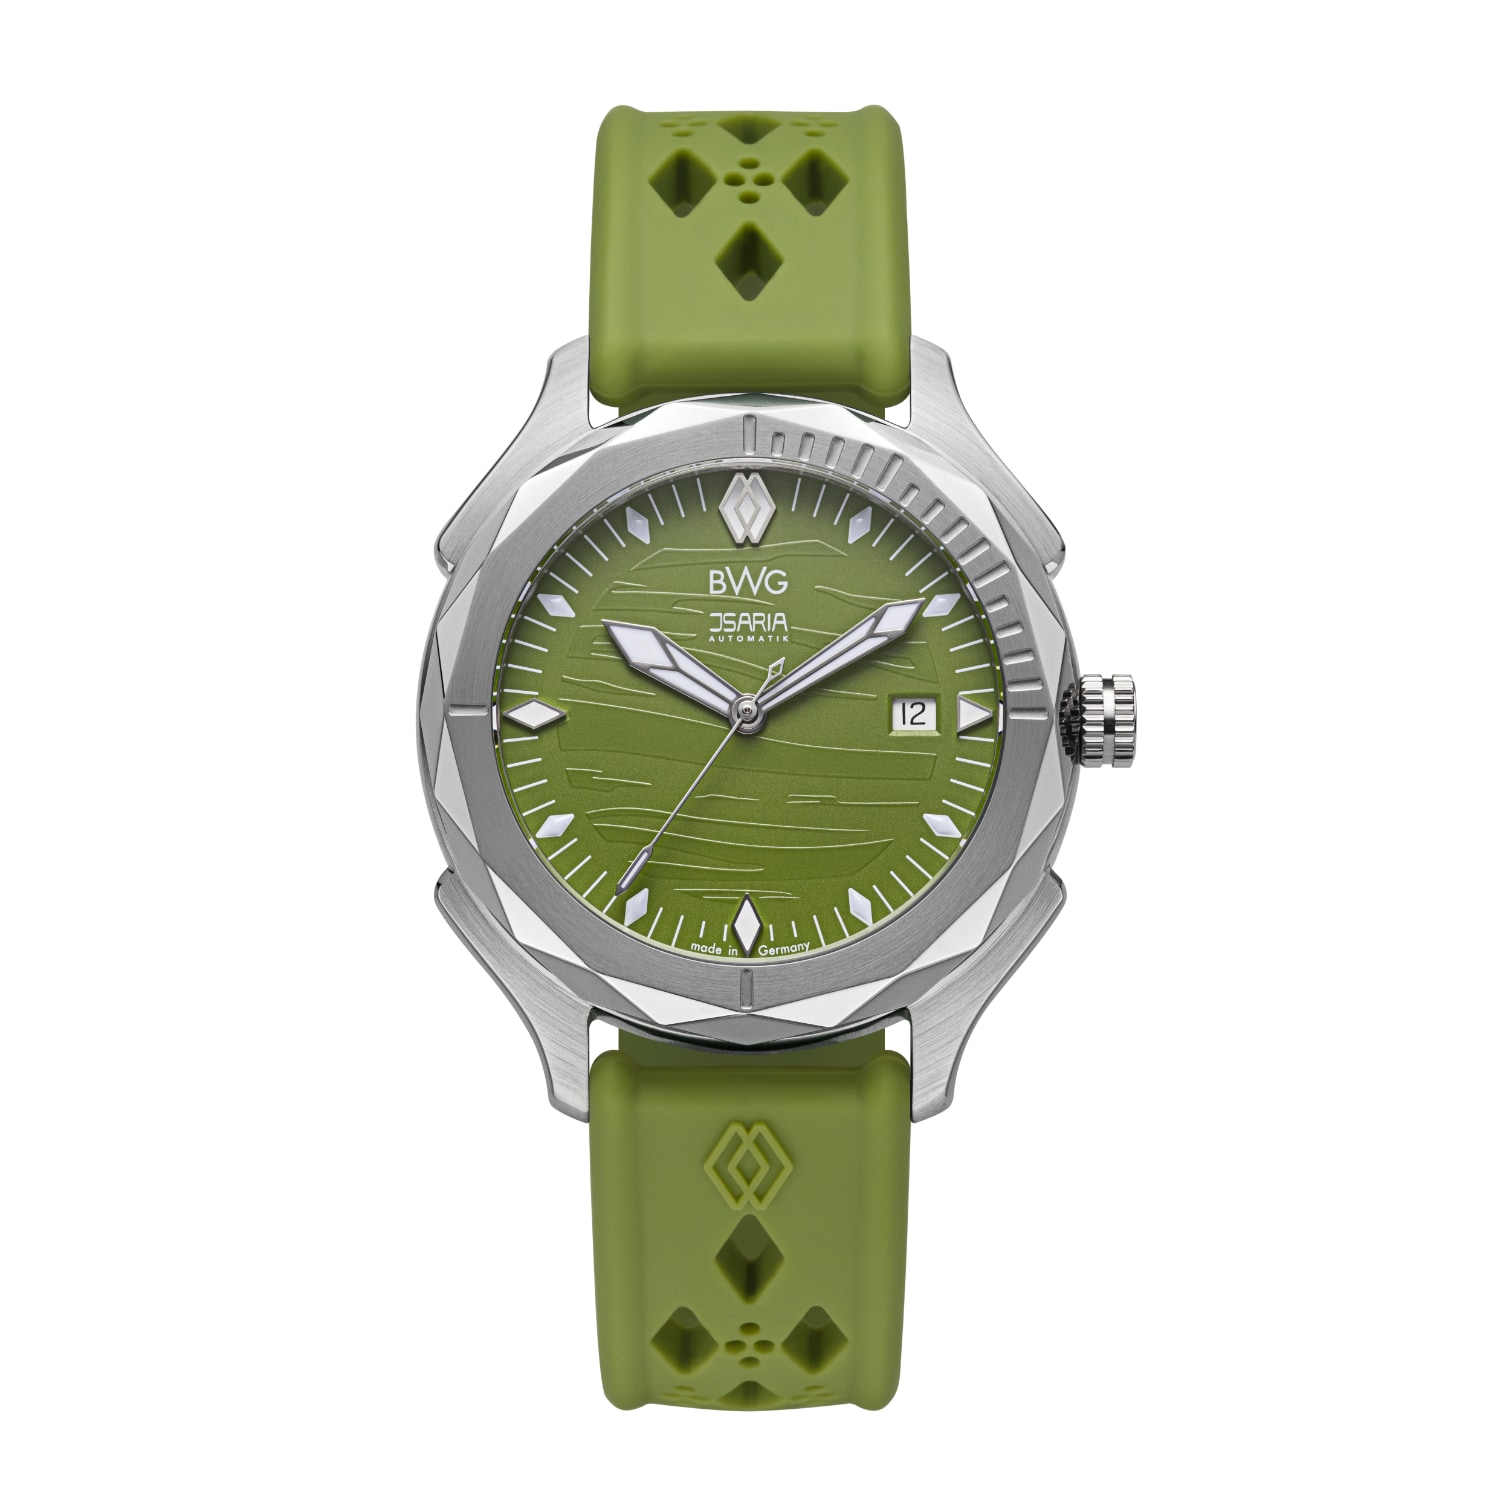 Isaria Isar Green Men’s Swiss Automatic Watch Made In Germany One Size Bwg Bavarian Watch